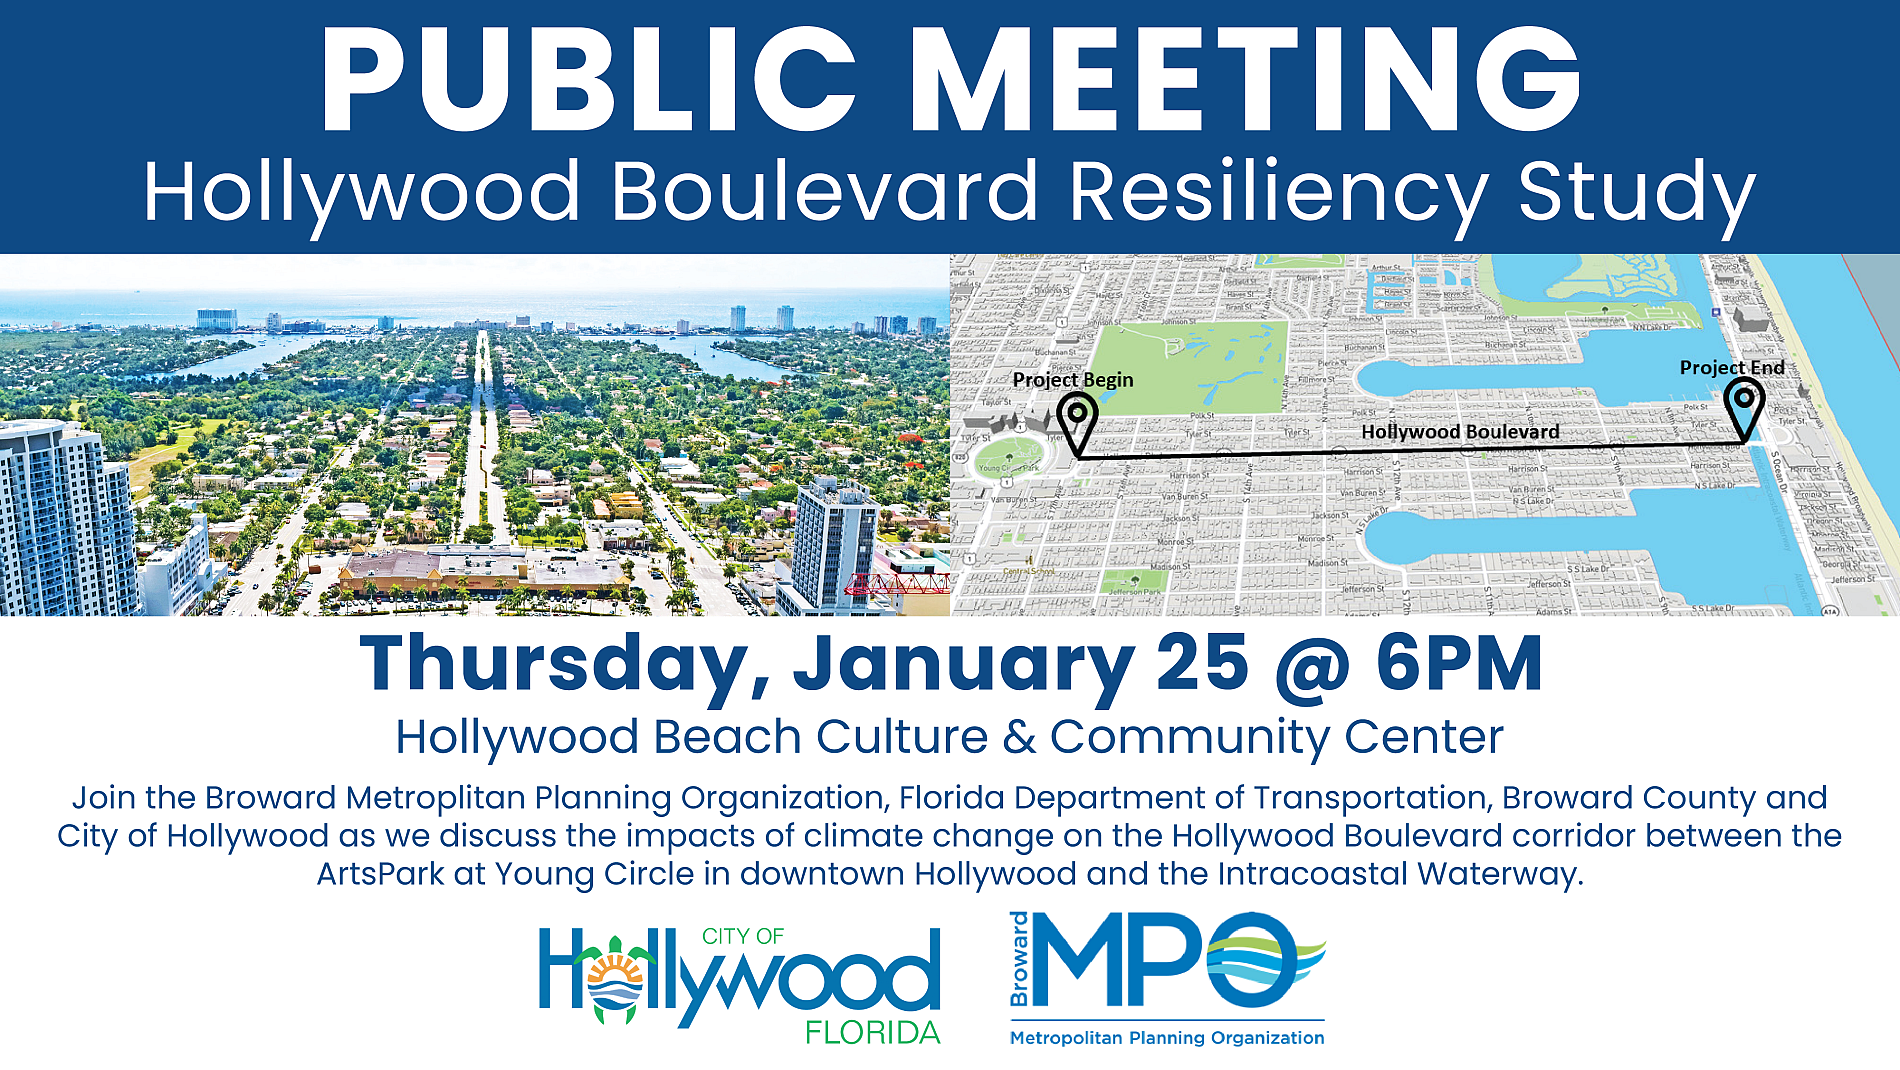 Hollywood Blvd Resiliency Study Meeting